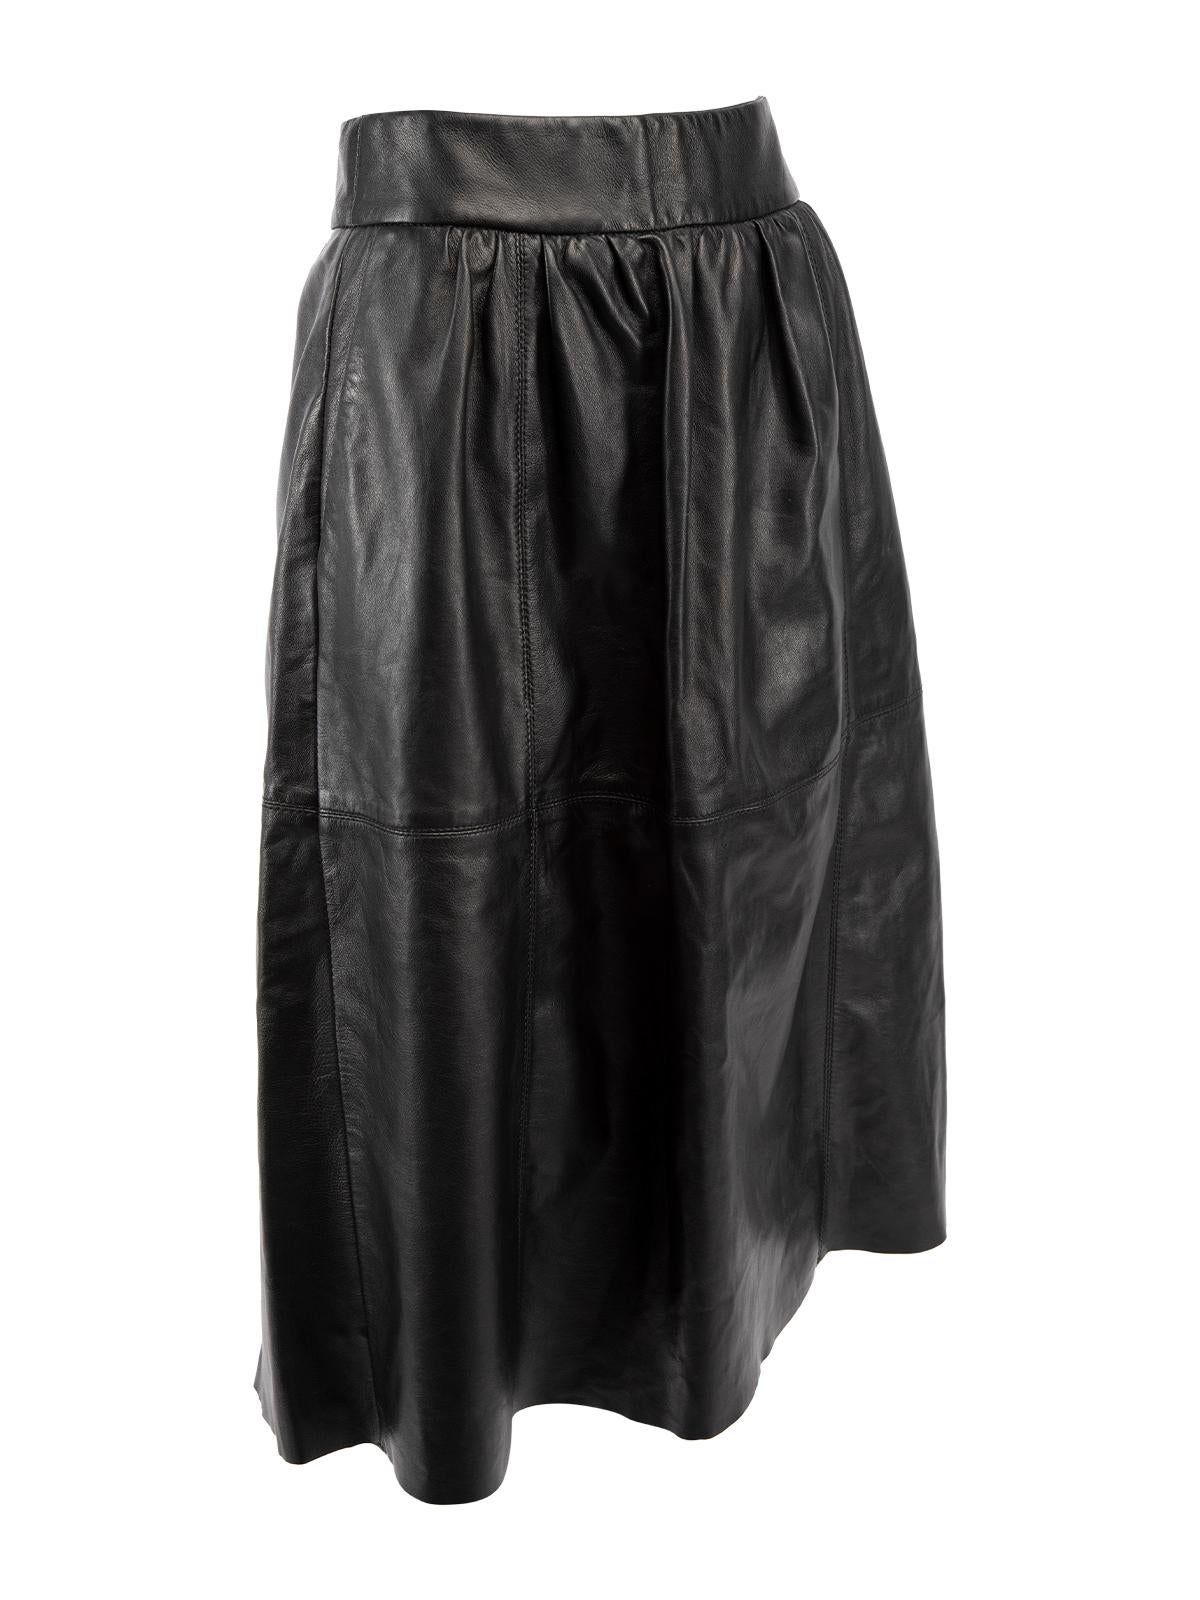 CONDITION is Very good. Hardly any visible wear to this skirt is evident on this used Karen Millen designer resale item.   Details  Black  Leather  A line style Zip fastening  Front pockets   Made in TURKEY   Composition 100% LEATHER Care